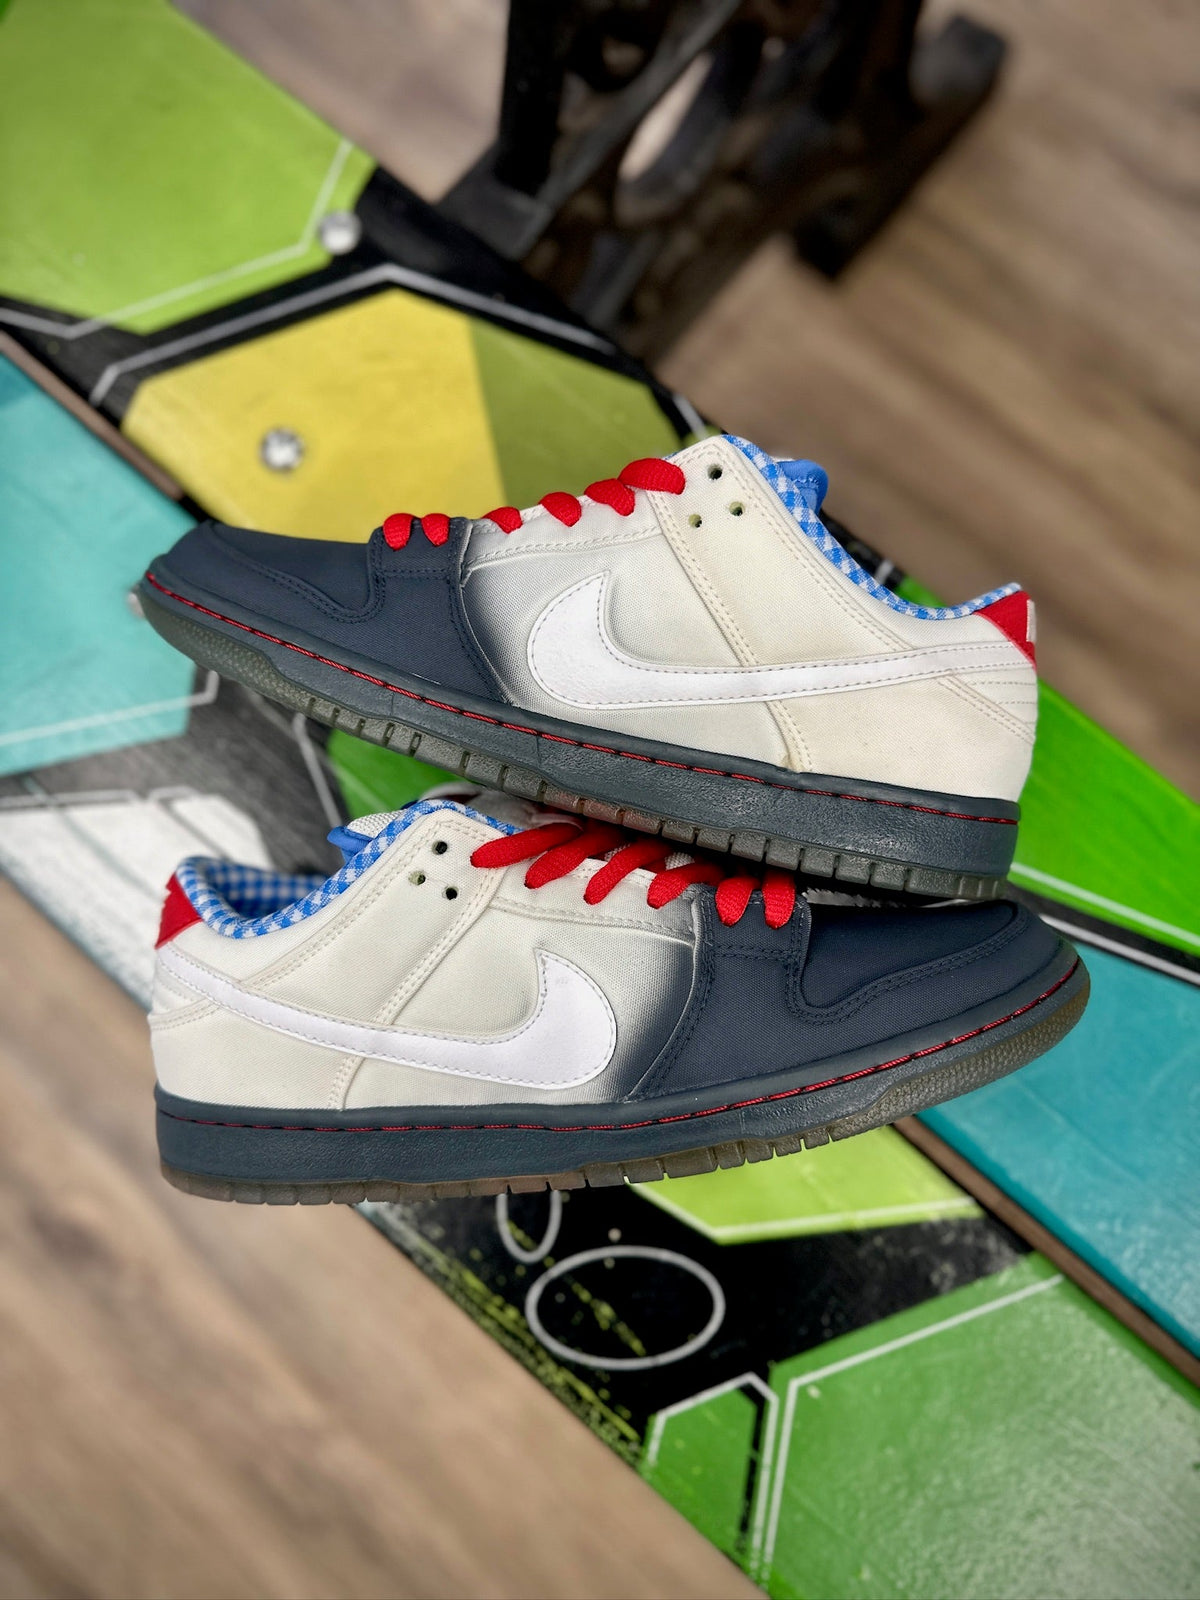 Reviewing the Nike SB Dunk Low 